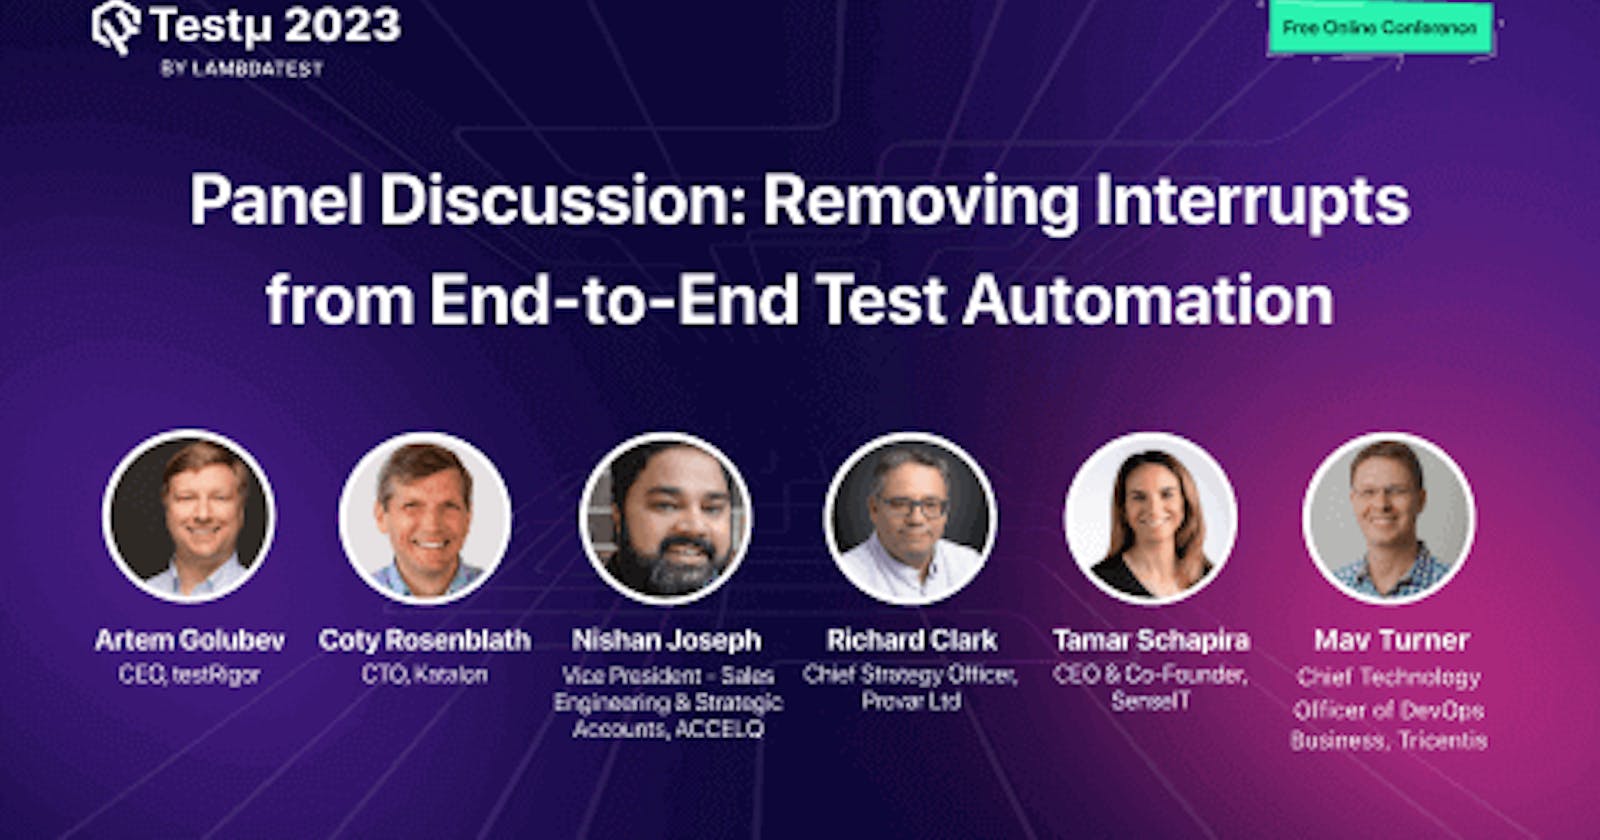 Panel Discussion: Removing Interrupts From End-to-End Test Automation [Testμ 2023]